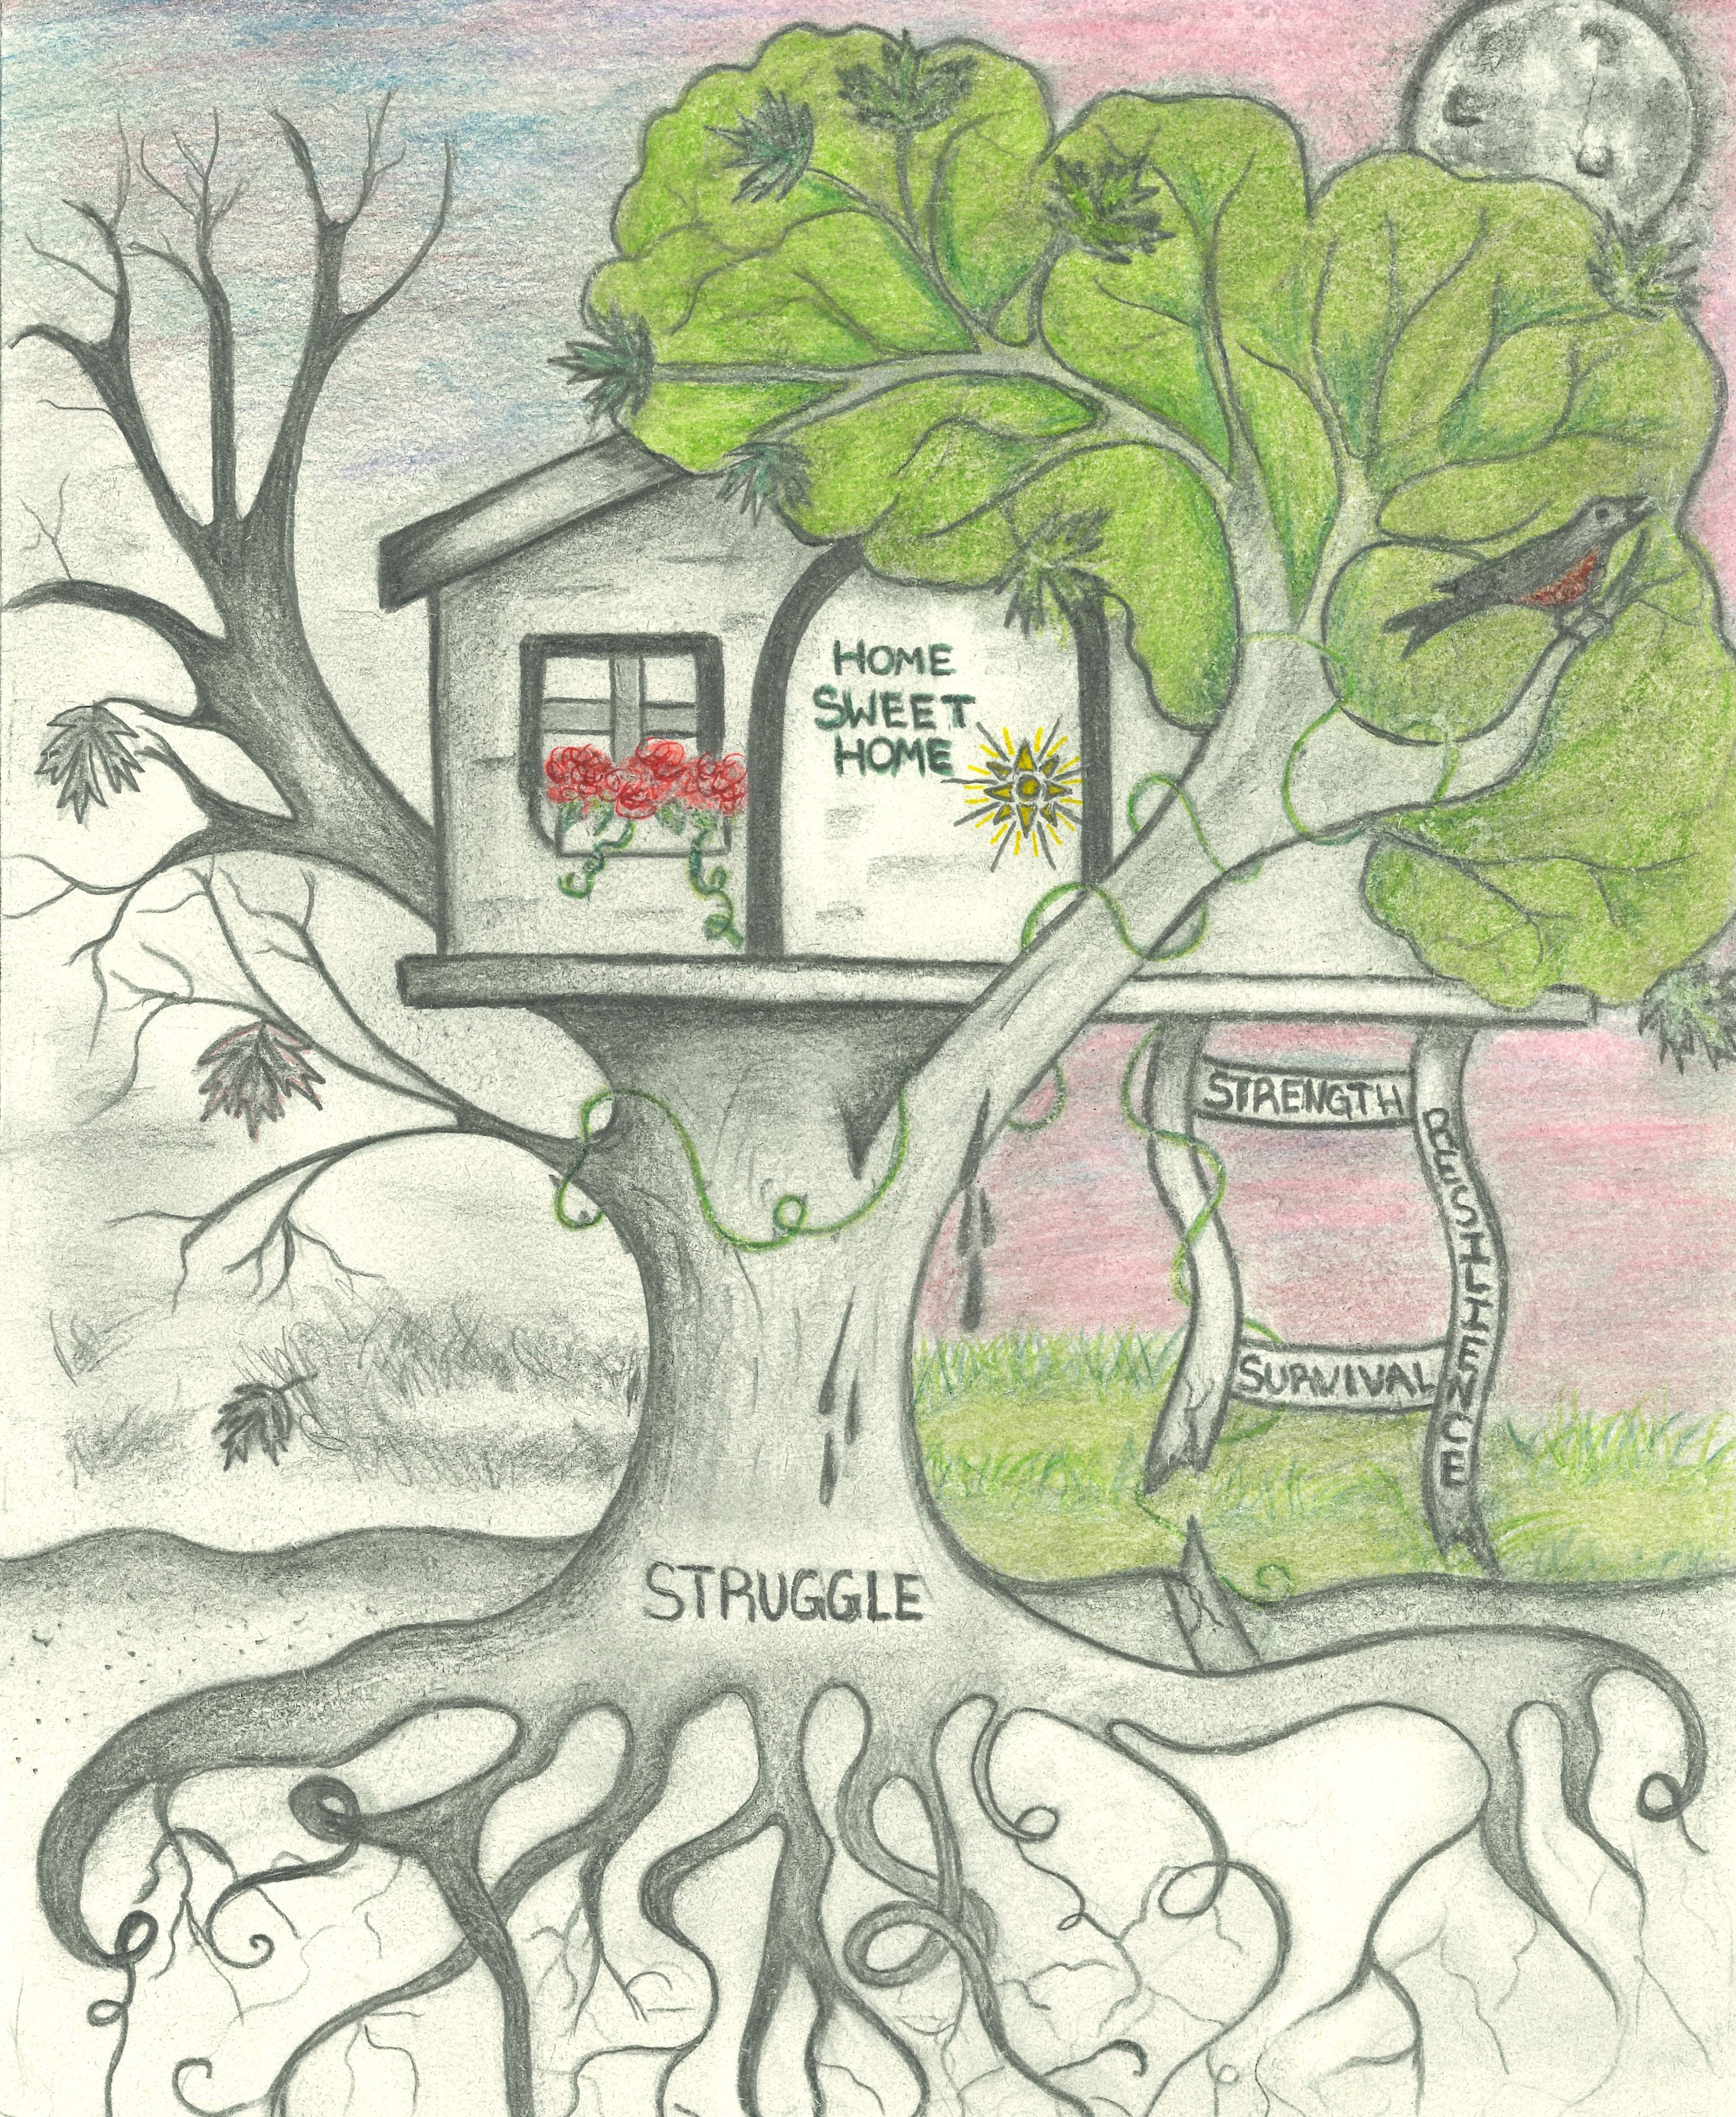 From Roots to Home image of a tree depicting the root causes of homelessness and the effort to become housed. The tree has the words strength, resilience, survival, and struggle. The image is two sided - one side hows what can happen if people are provided with care and support and the other side represents what happens when people are not given the tools and resources to flourish.